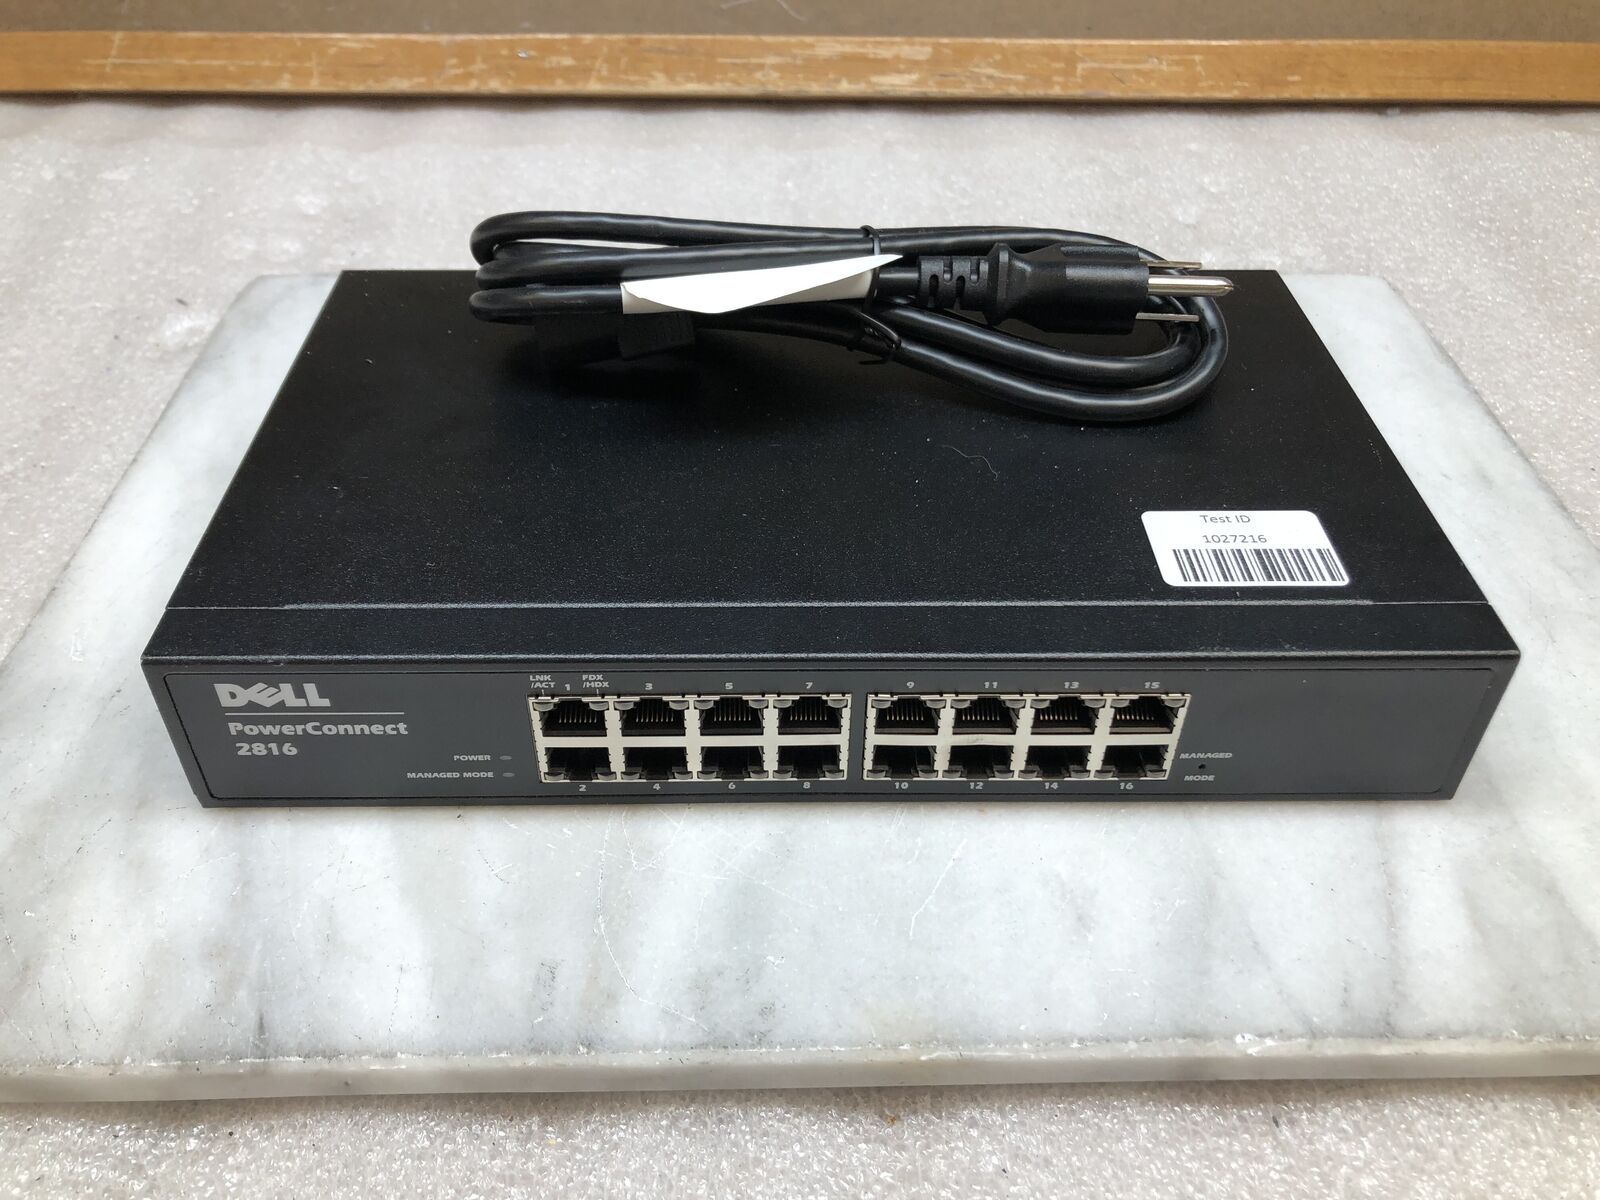 Dell PowerConnect 2816 16-Port Eth 10/100/1000 Gigabit Network Switch TESTED